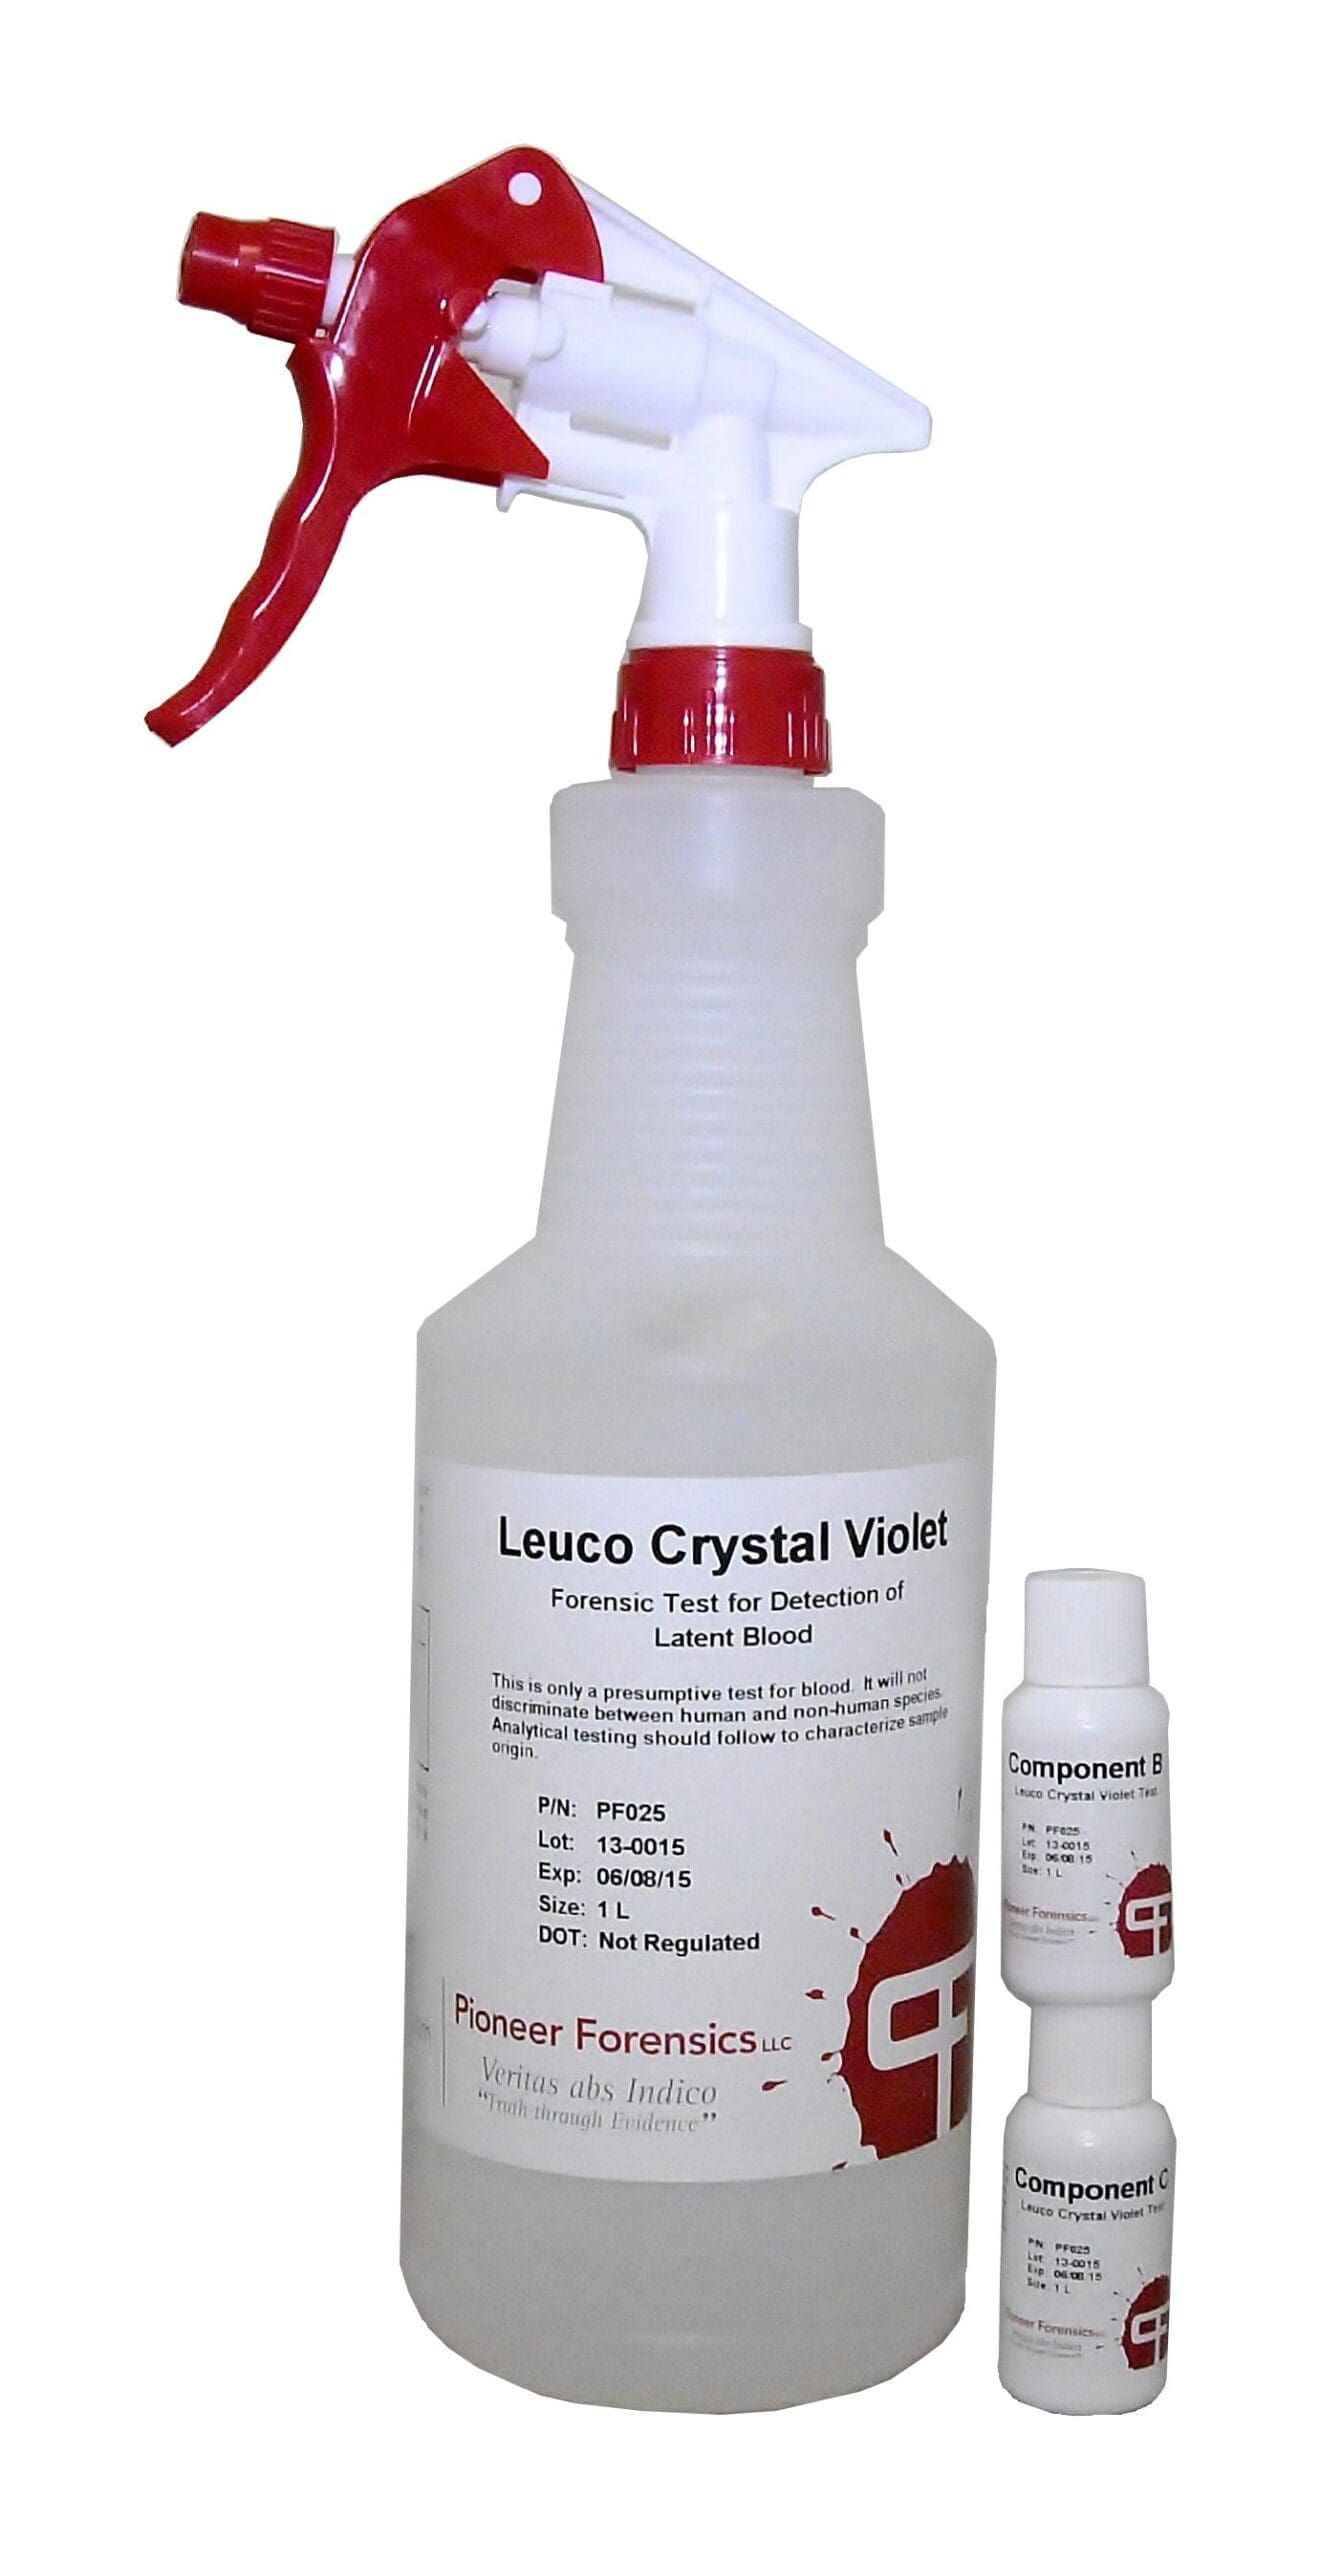 Leucocrystal Violet reacts with the heme-group in blood to give a violet color.